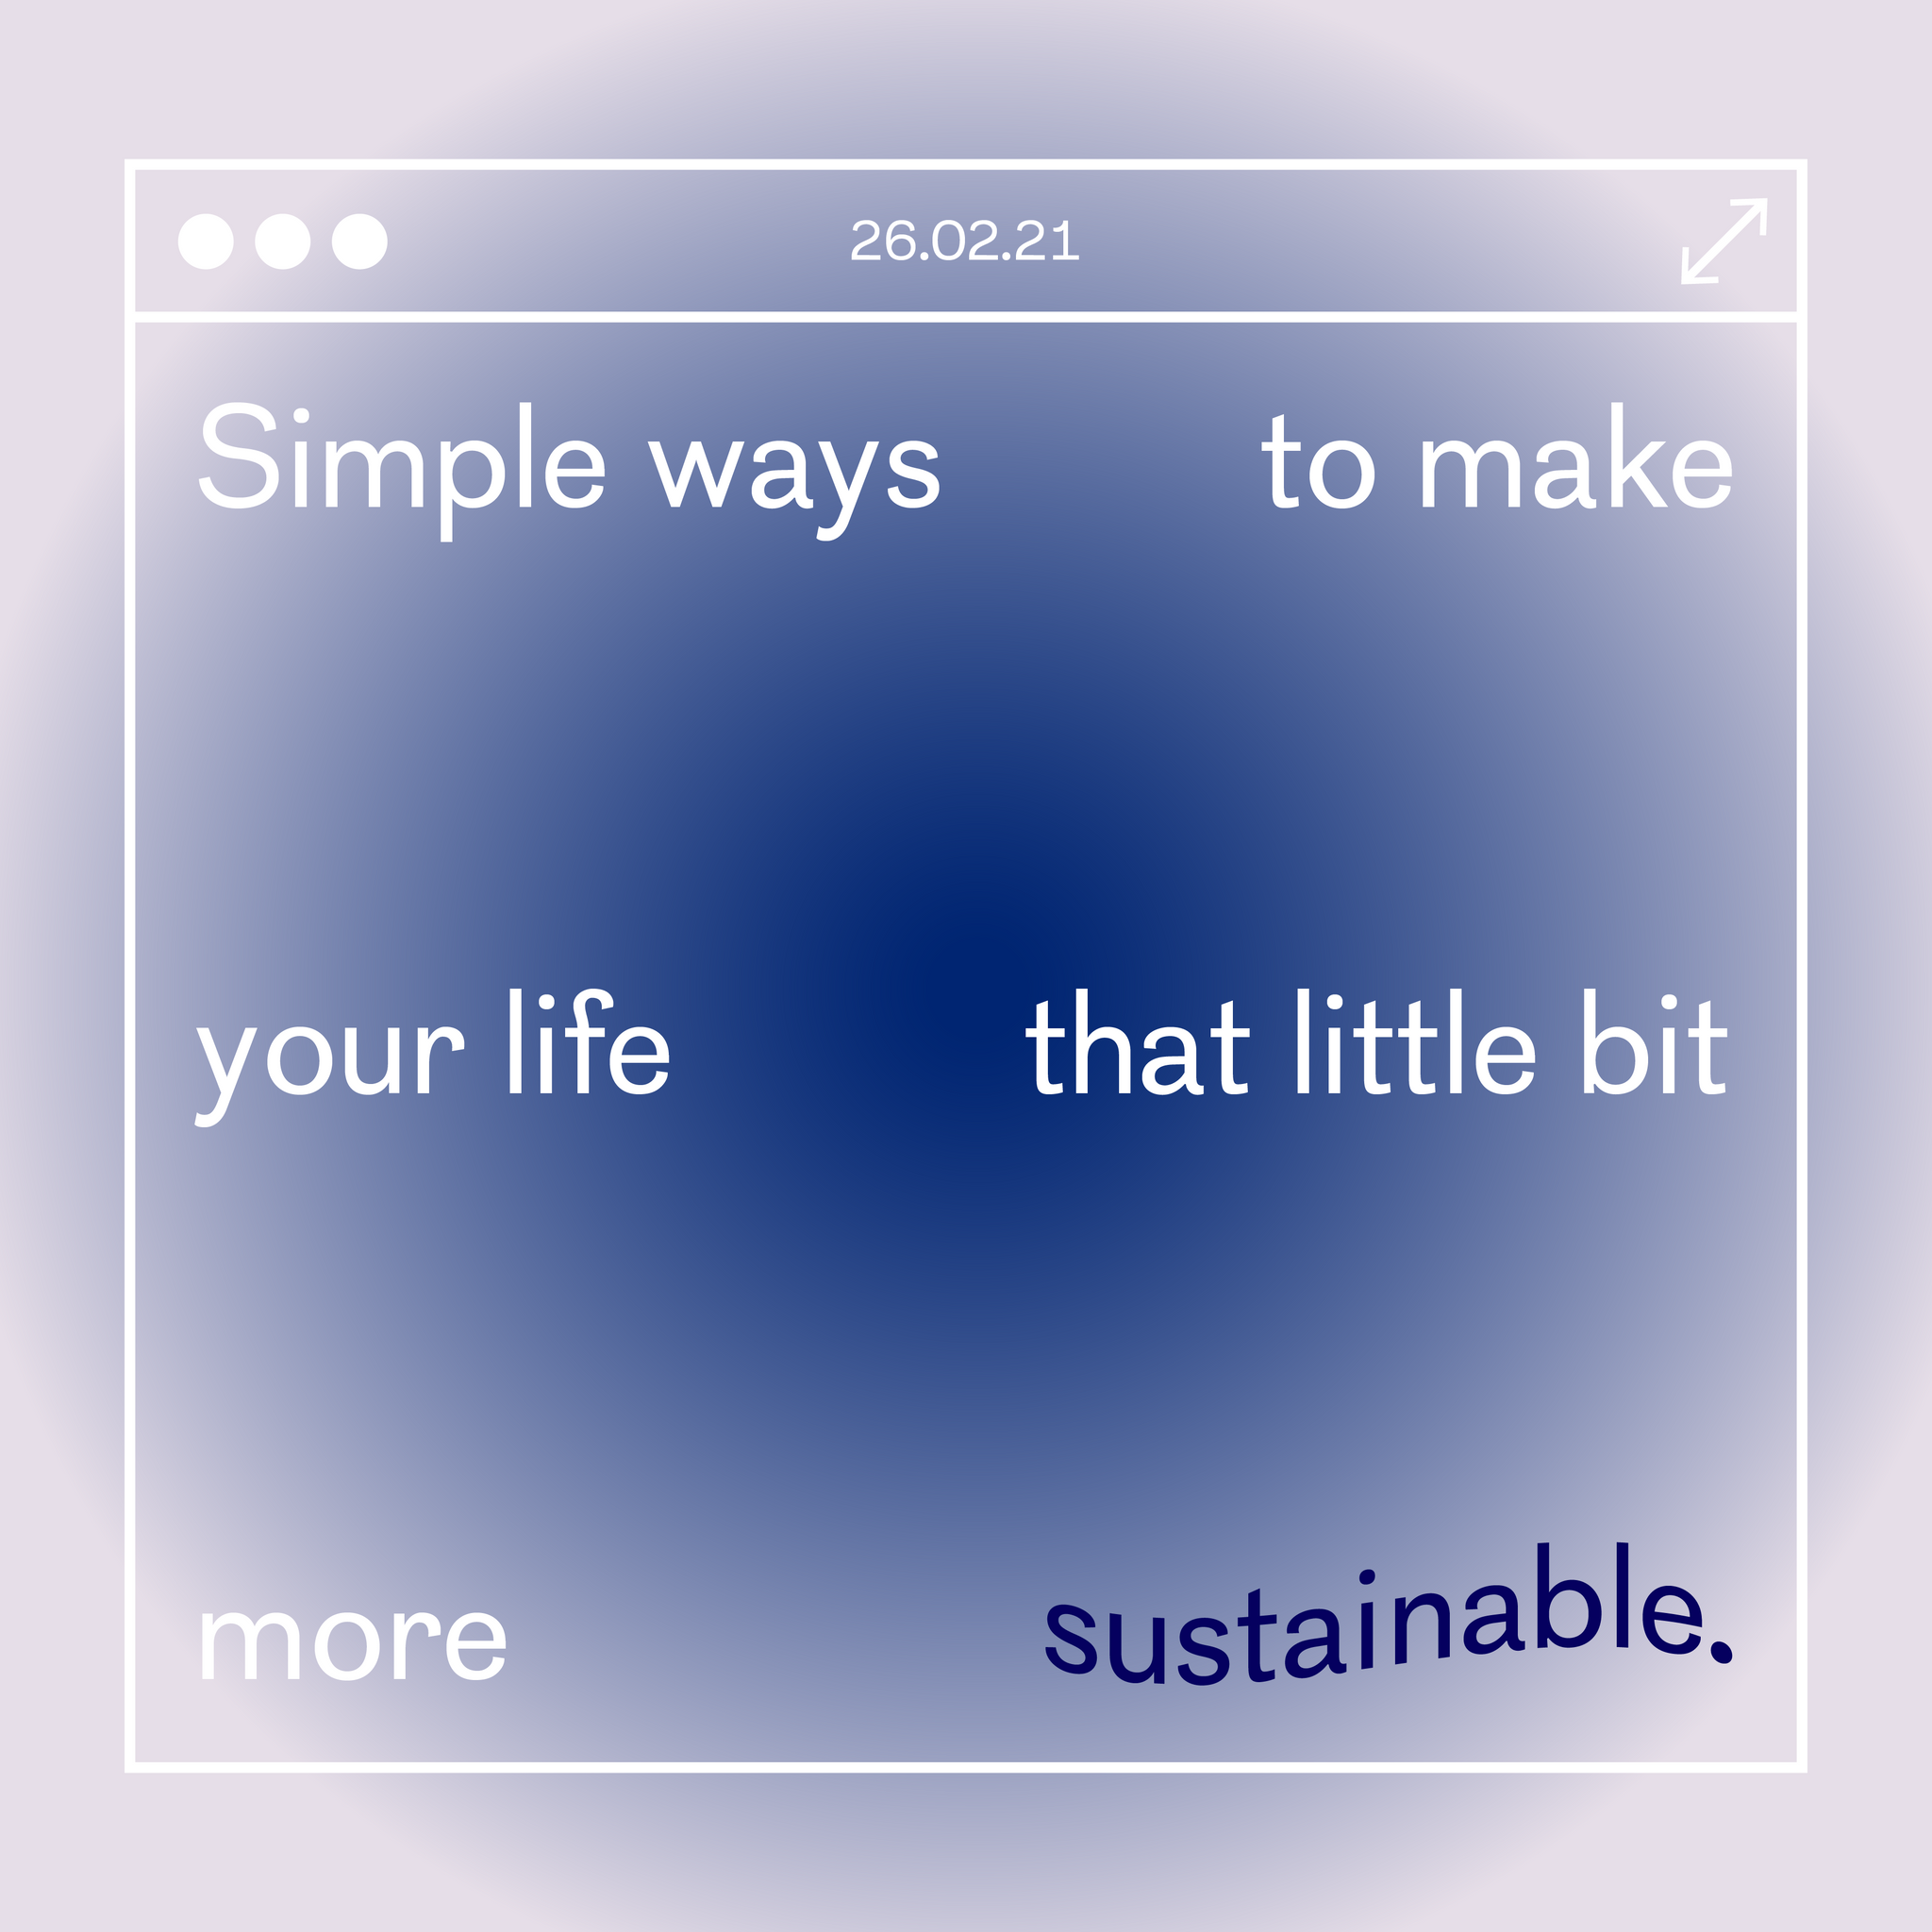 Simple ways to make your life that little bit more sustainable